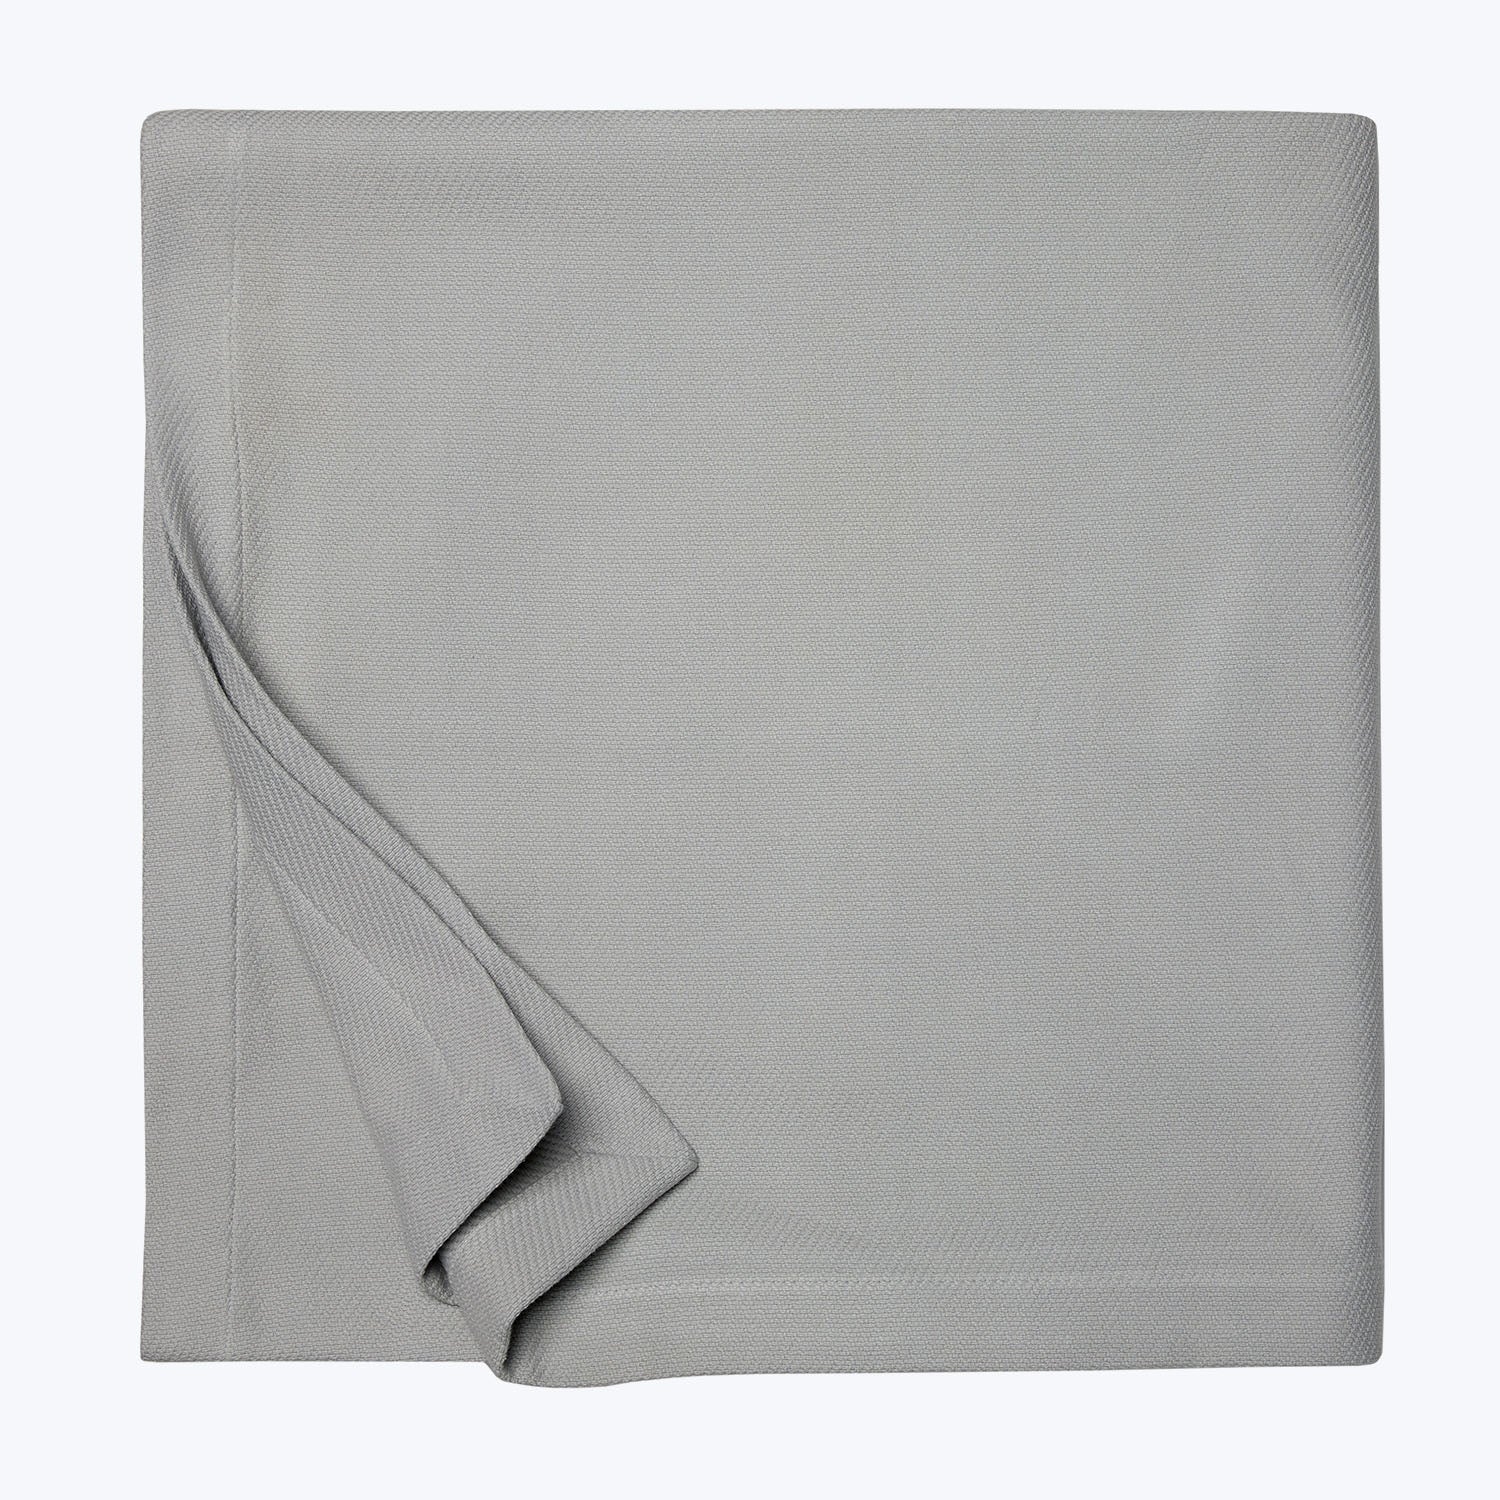 Neatly folded gray fabric with a smooth, tight weave showcased.